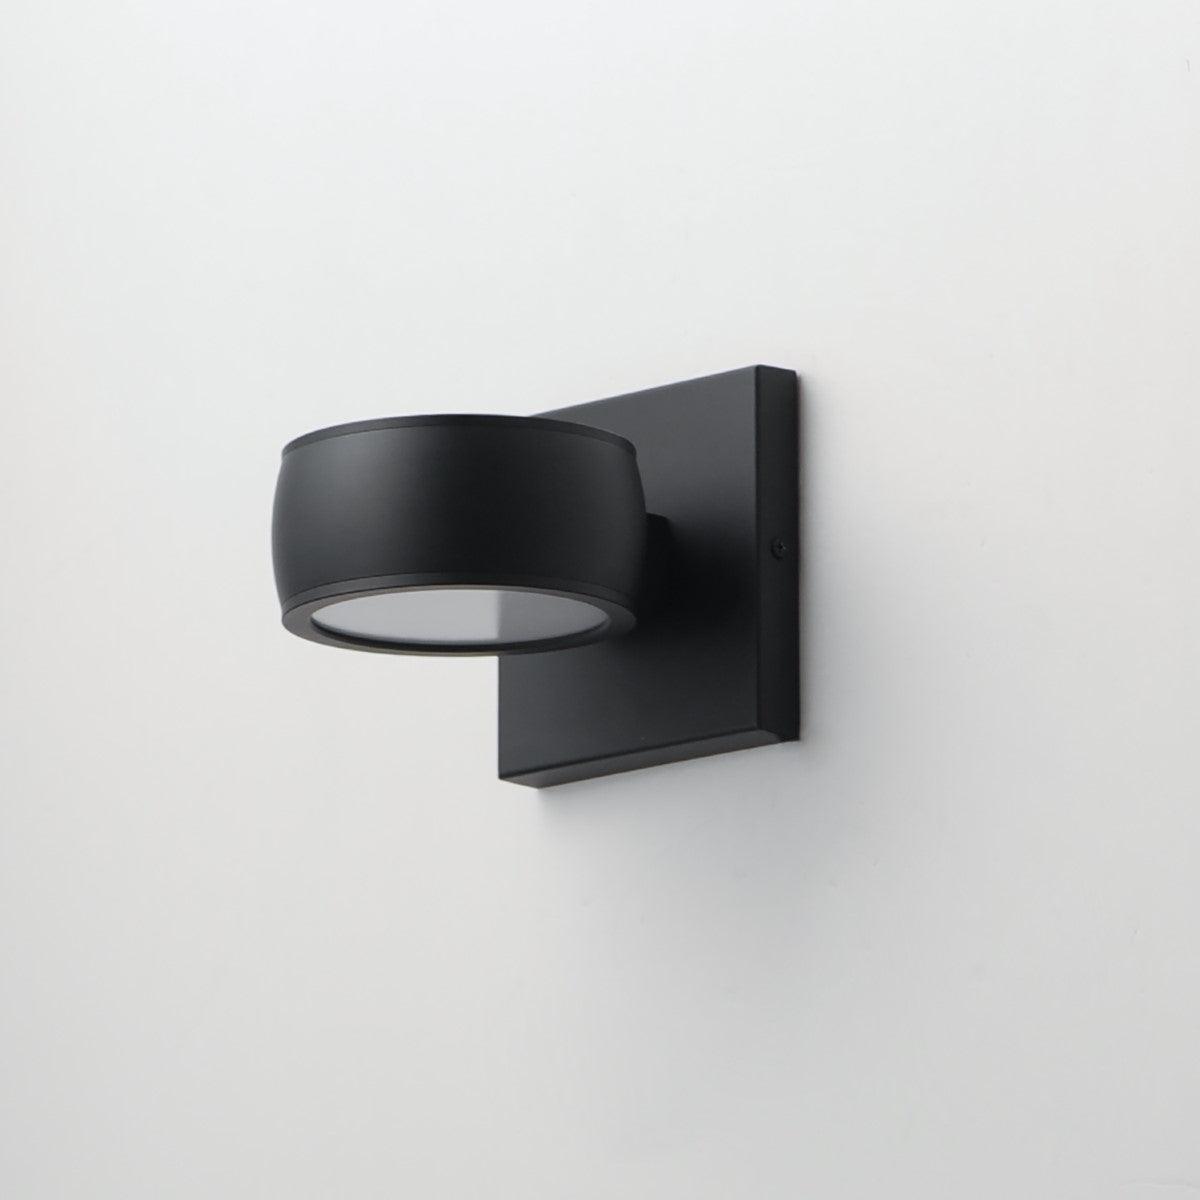 Modular 5 in. Round LED Outdoor Wall Sconce 3000K Black Finish